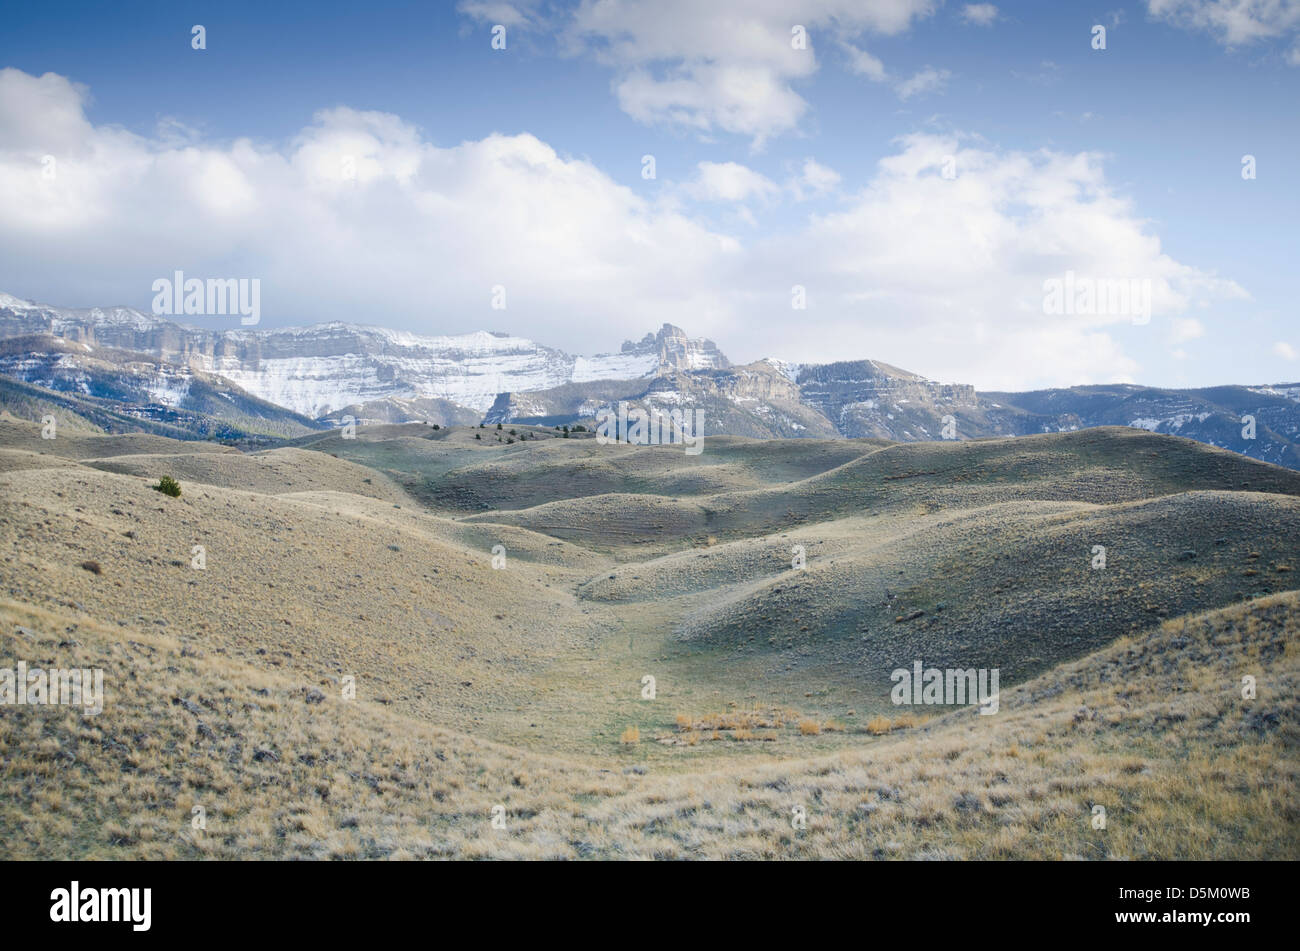 USA, Wyoming, View of Shoshone National Forest with Rocky Mountains in background Stock Photo